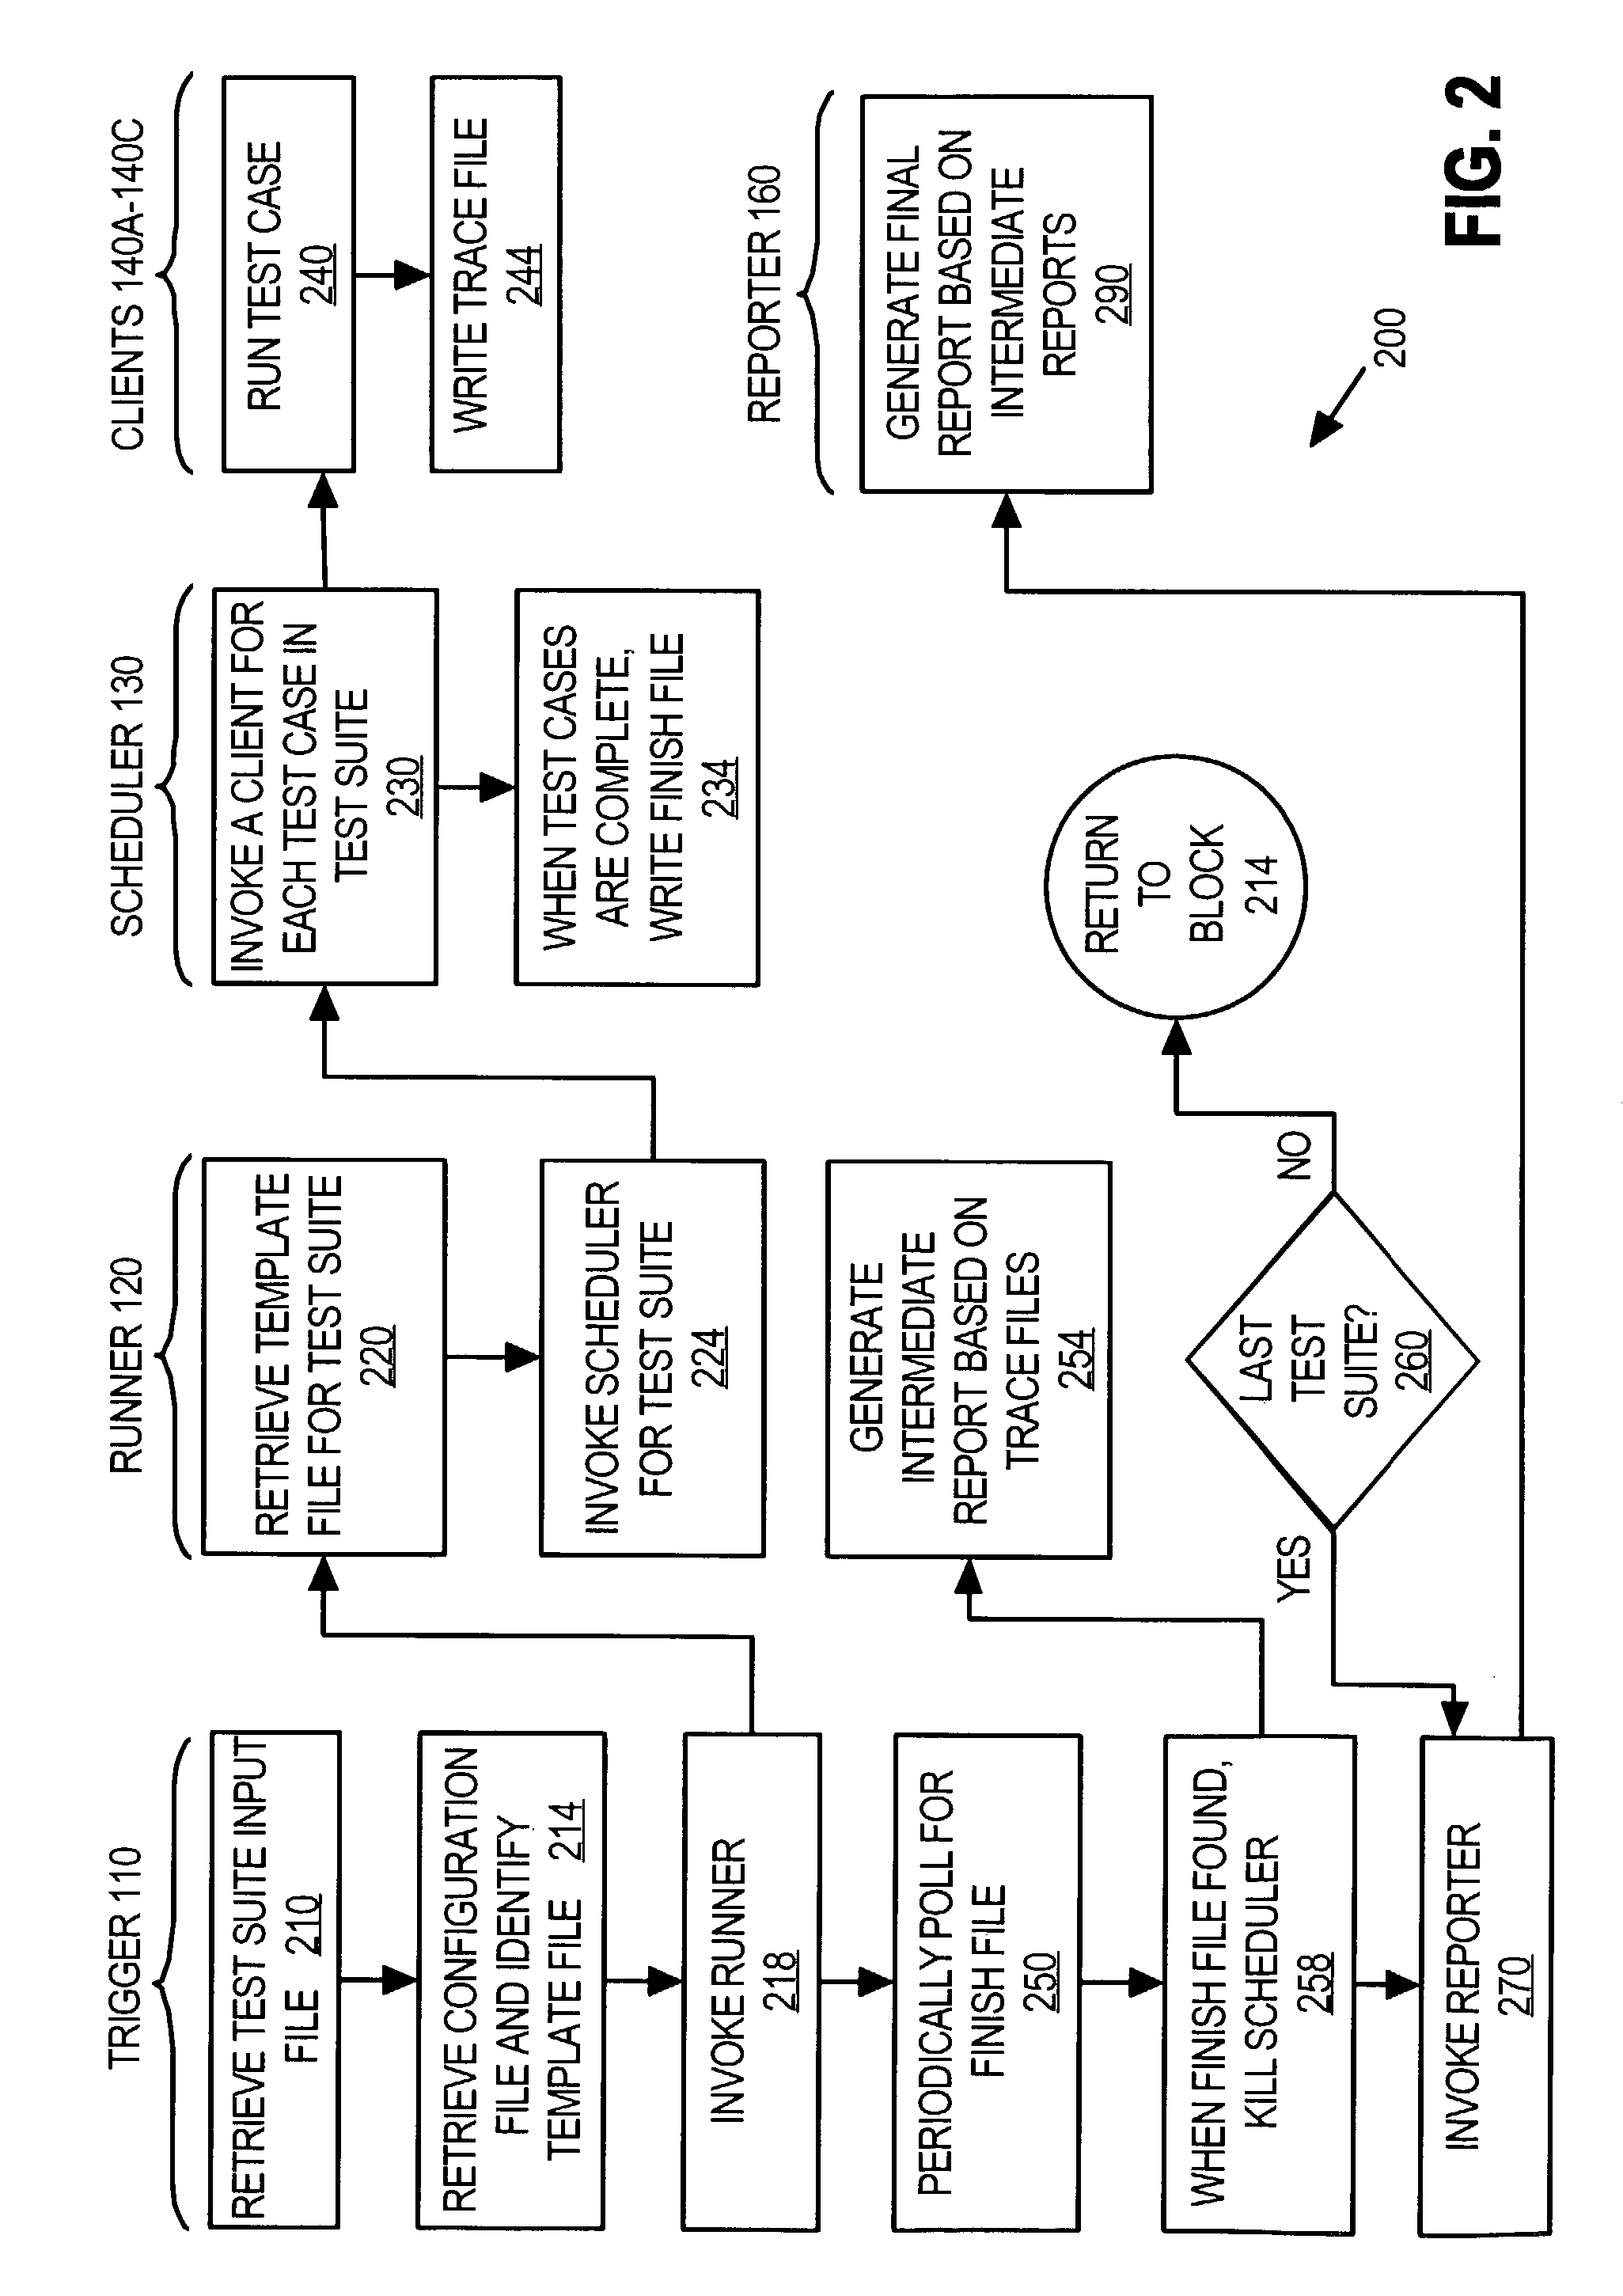 Mechanism for testing execution of applets with plug-ins and applications